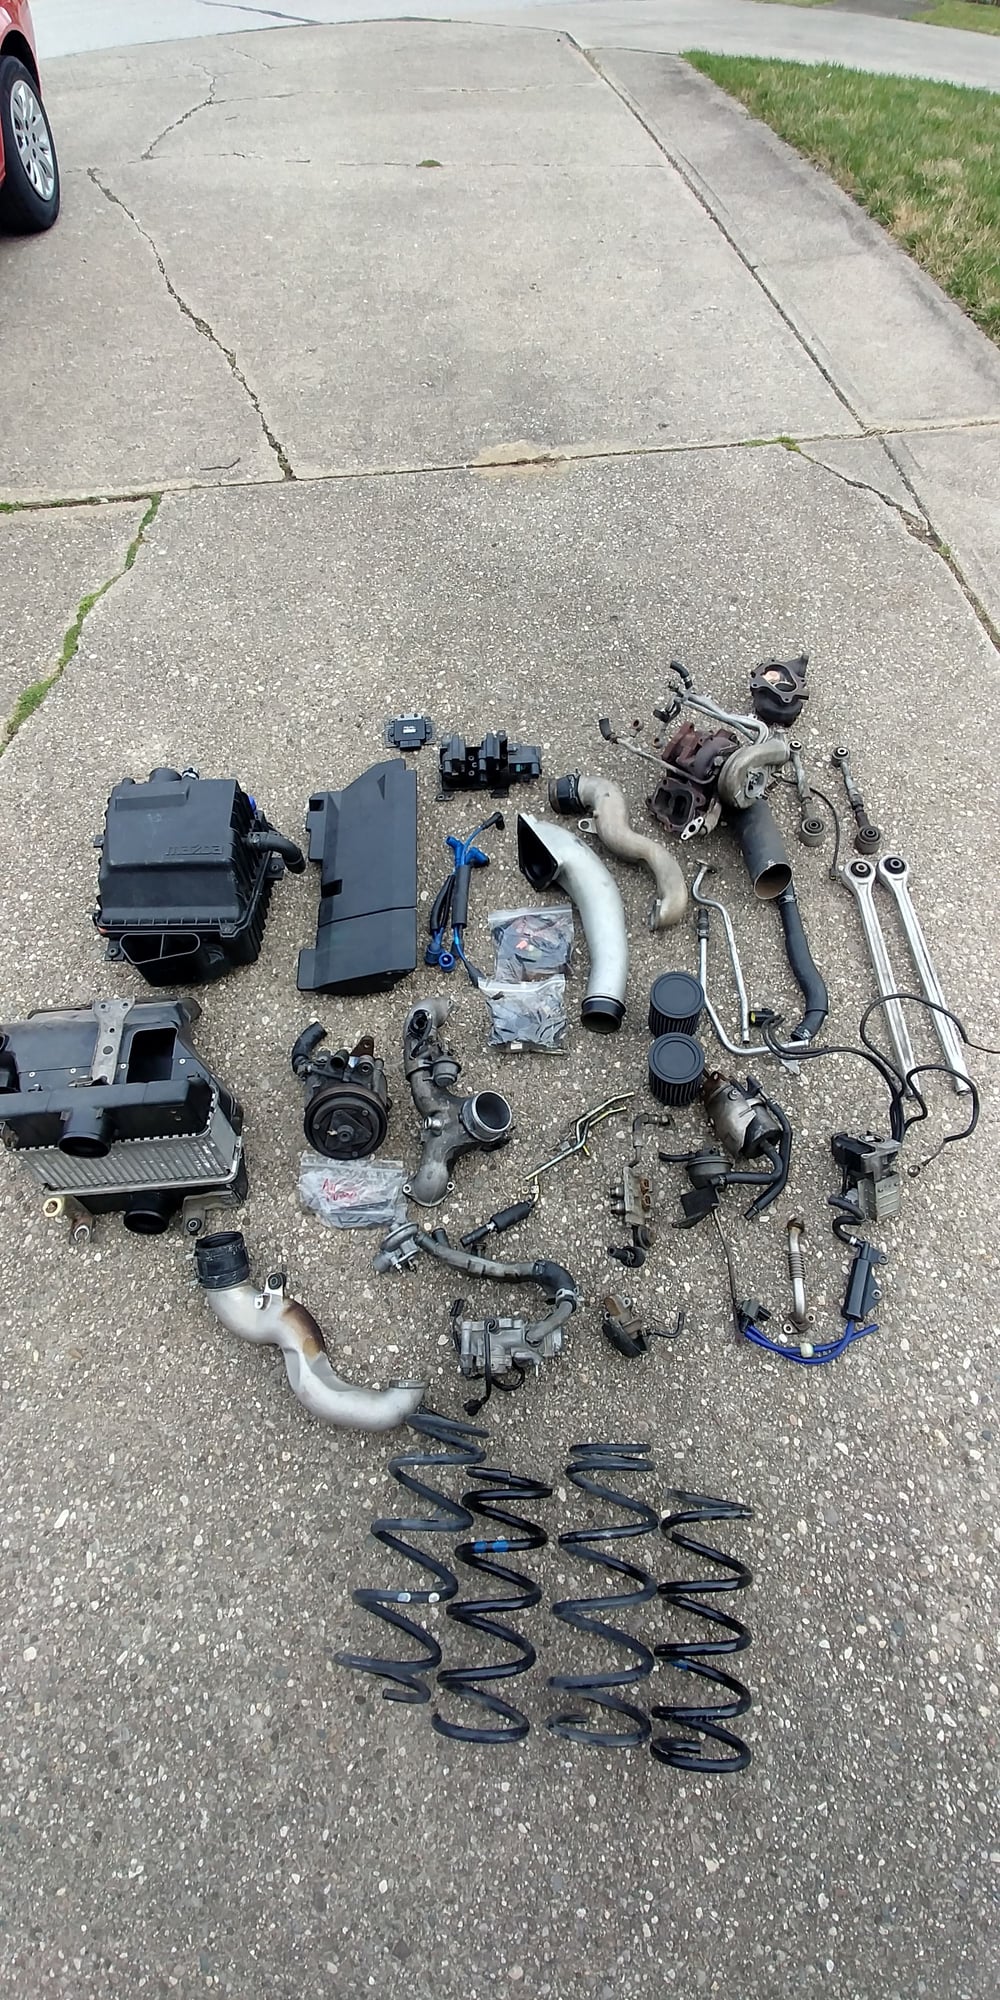 Miscellaneous - FD RX7 Parts, want them gone - Used - 0  All Models - Cincinnati, OH 45202, United States